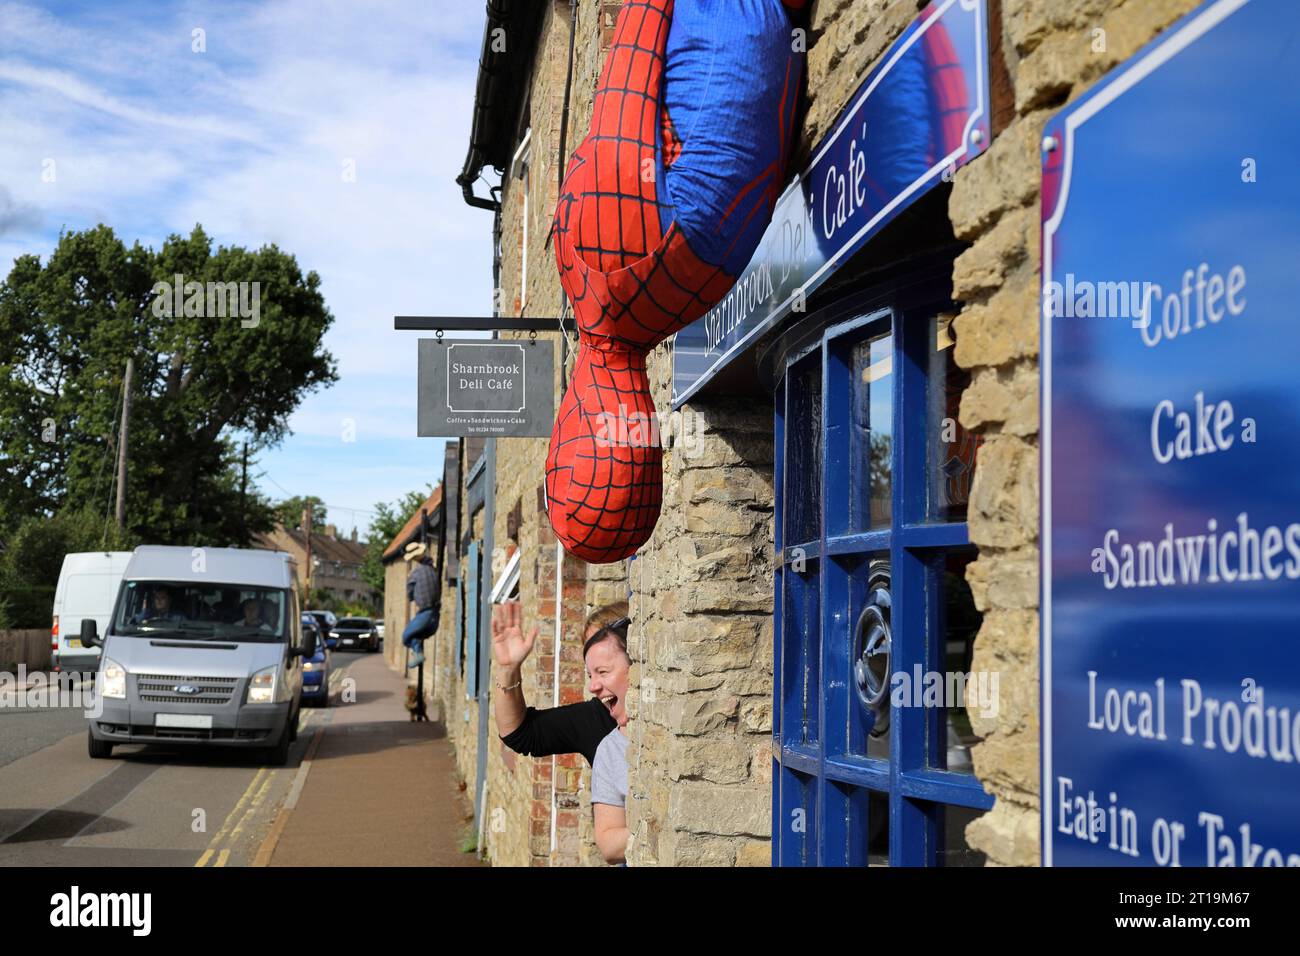 Spider-man scarecrow outside Deli Cafe during village scarecrow festival in Sharnbrook High Street, Bedfordshire, England, UK Stock Photo